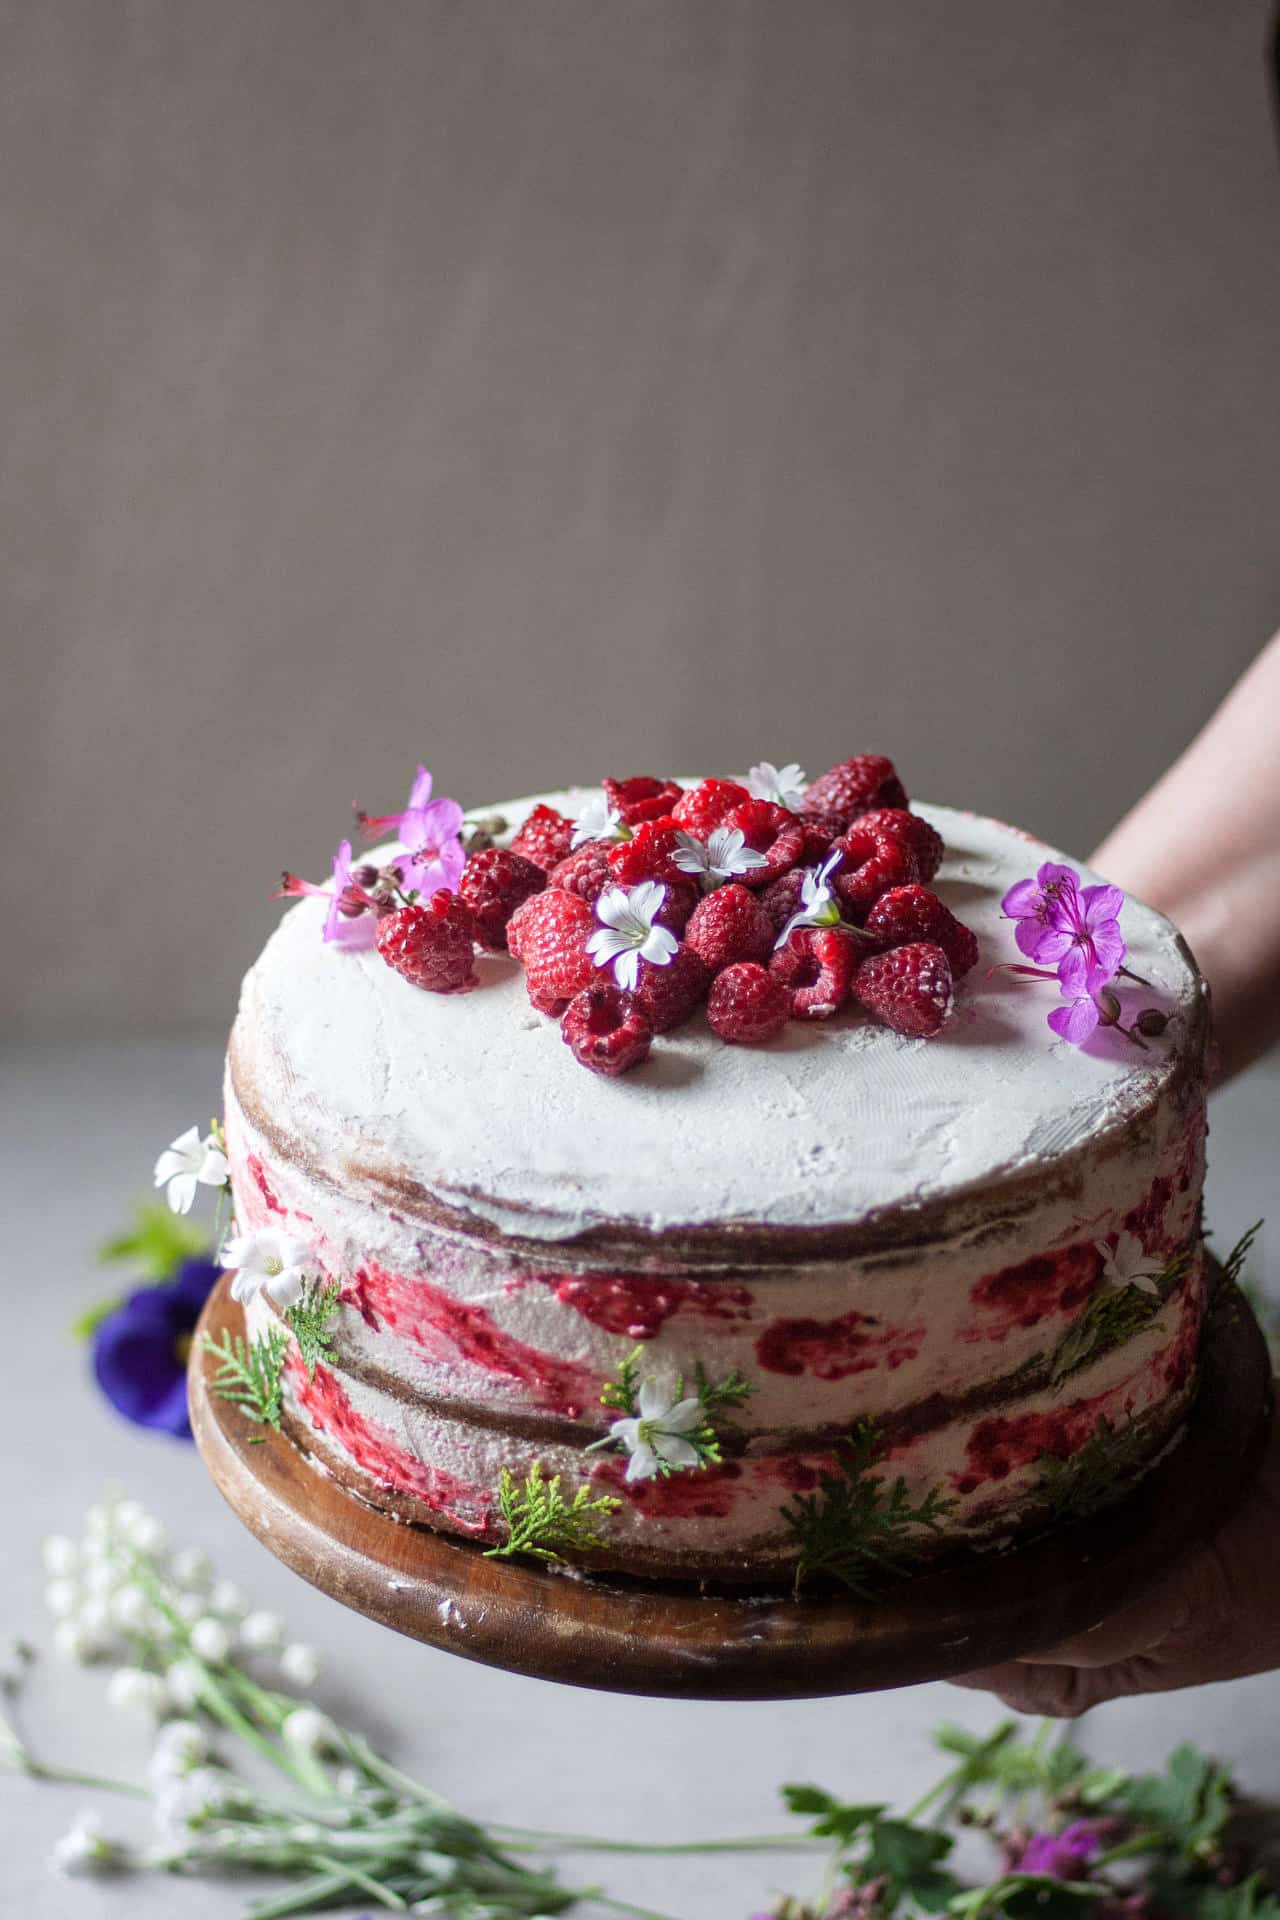 Low FODMAP Gluten-Free Naked Cake with Raspberries and Lemon. This cake is lactose-free, soft, creamy, super light, flavorful and very refreshing.